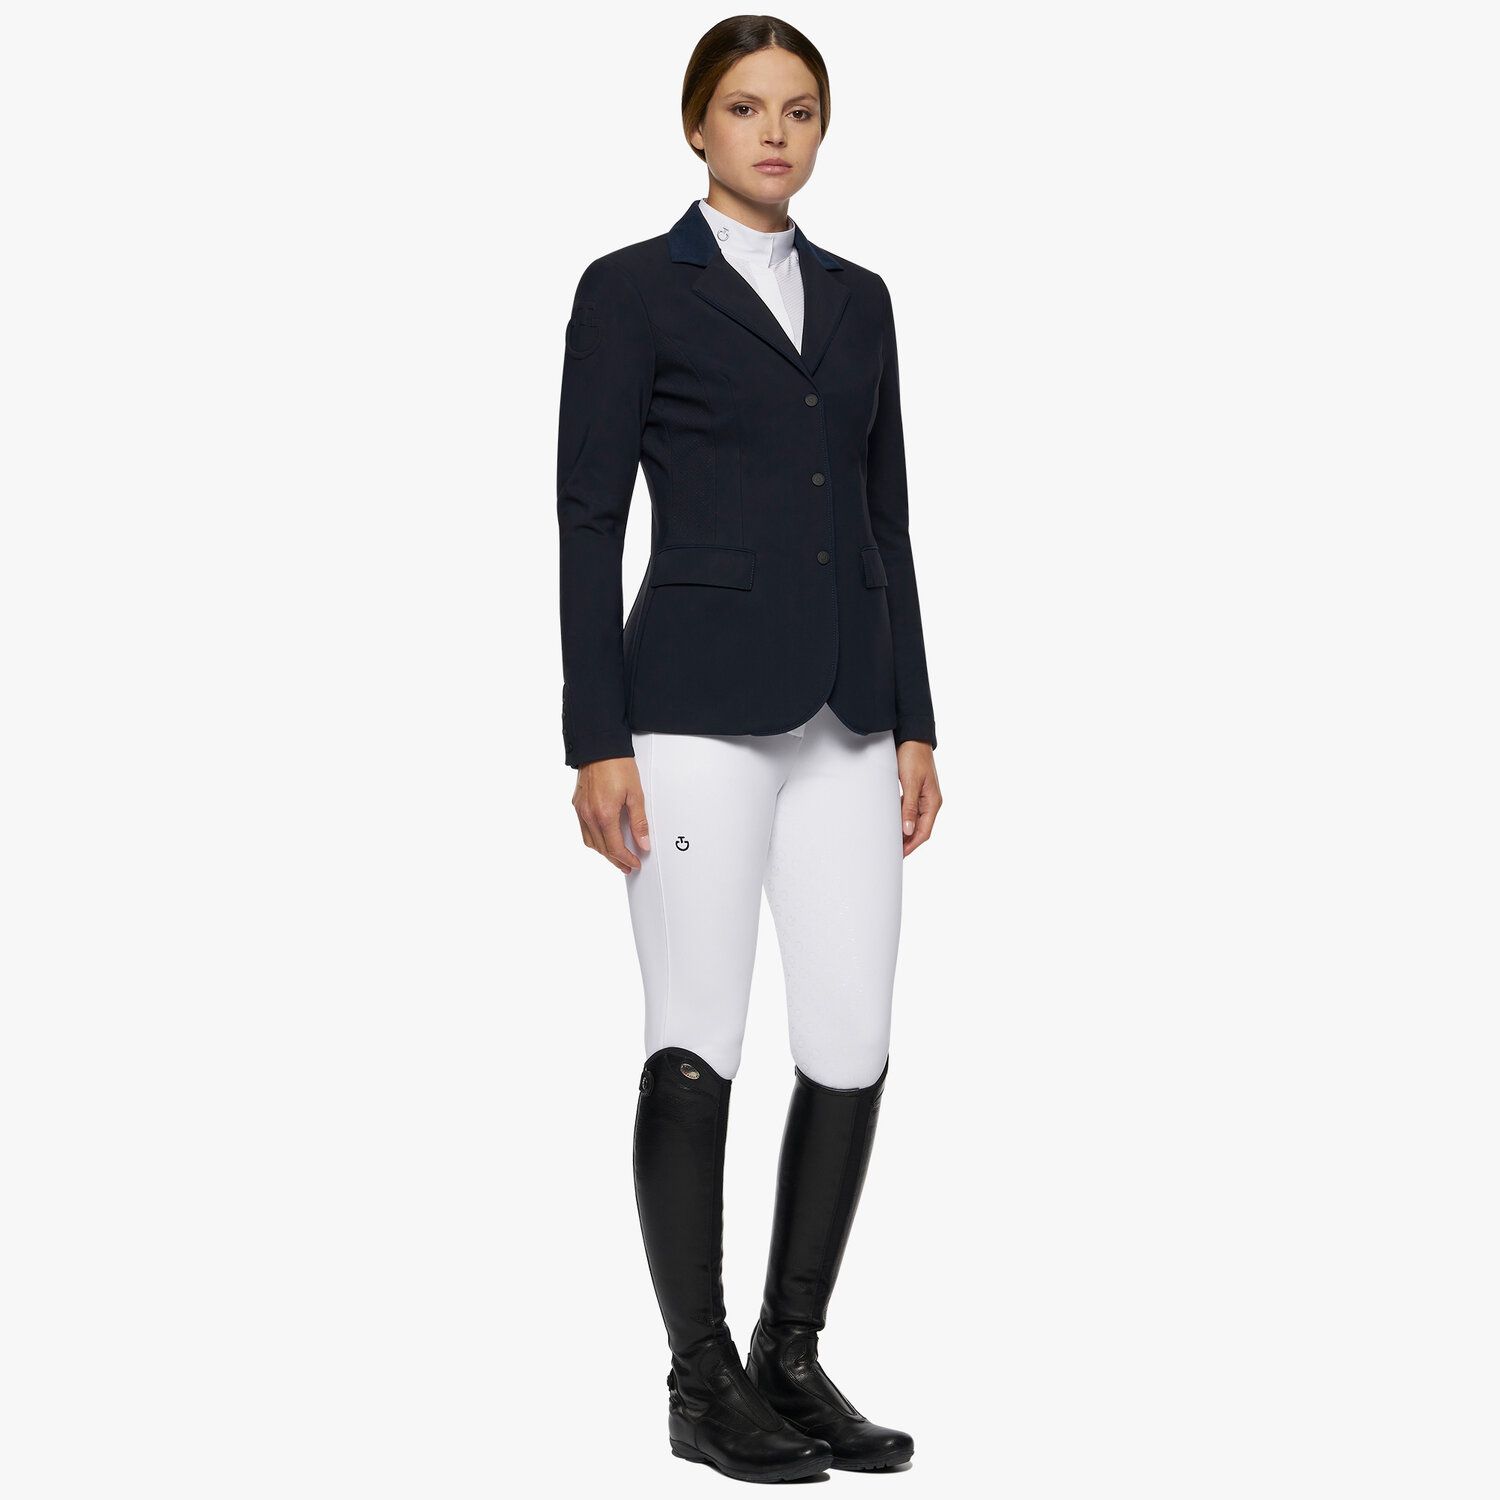 Cavalleria Toscana Women's zip riding jacket with perforated inserts. NAVY-2